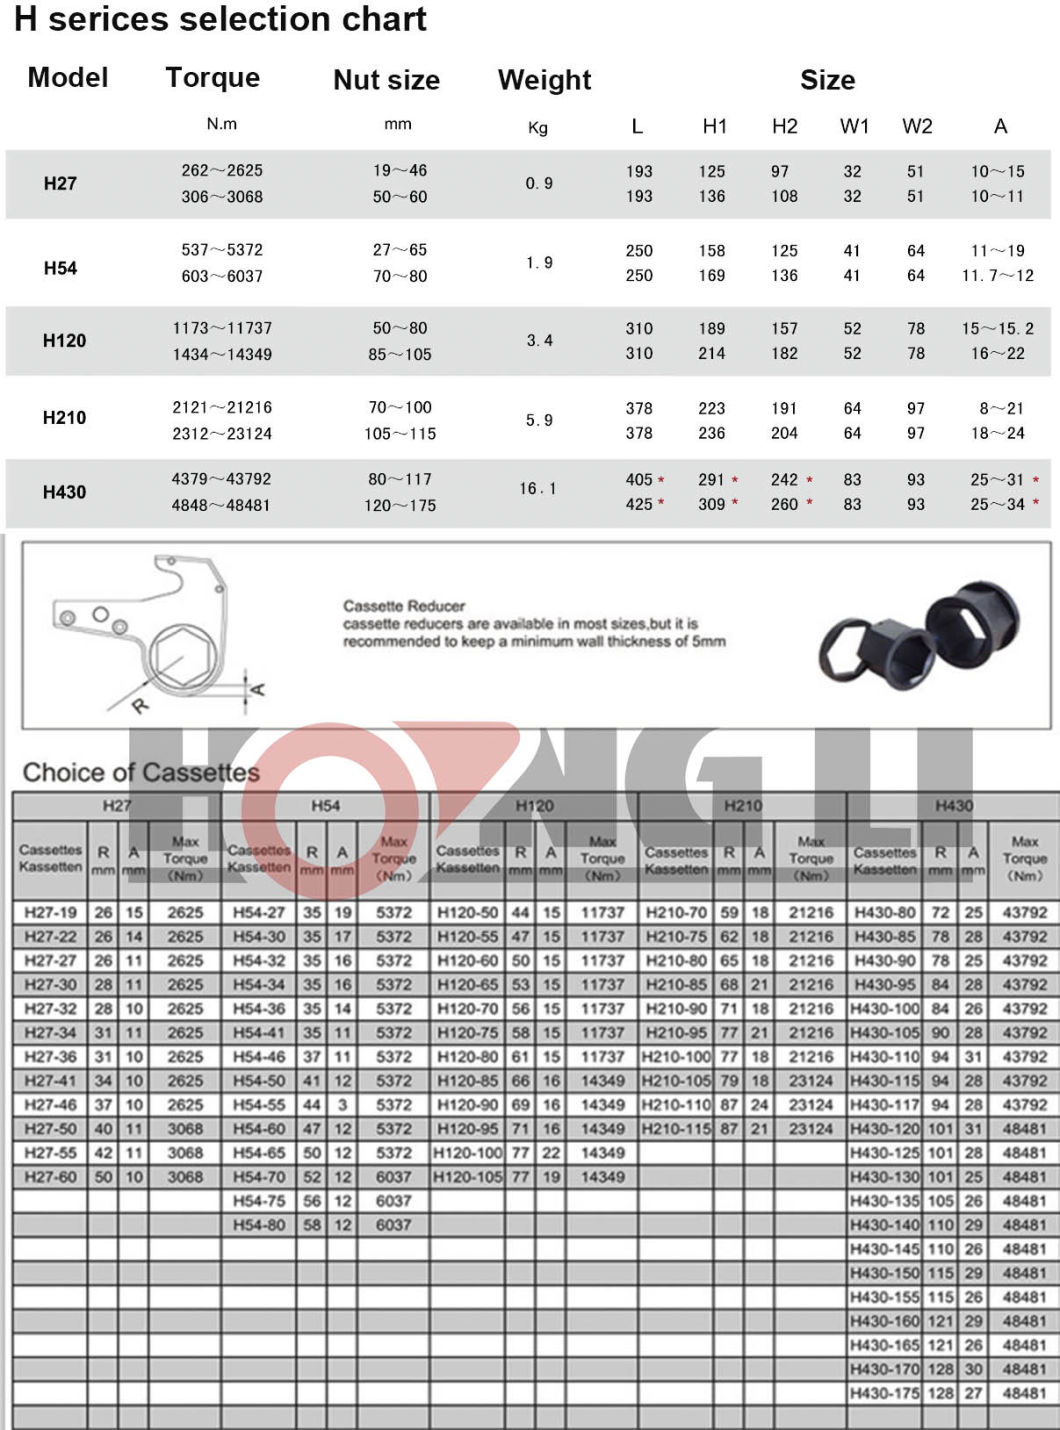 Hydraulic Torque Wrench /Impact Wrench /Electric Hydraulic Wrench (H54)